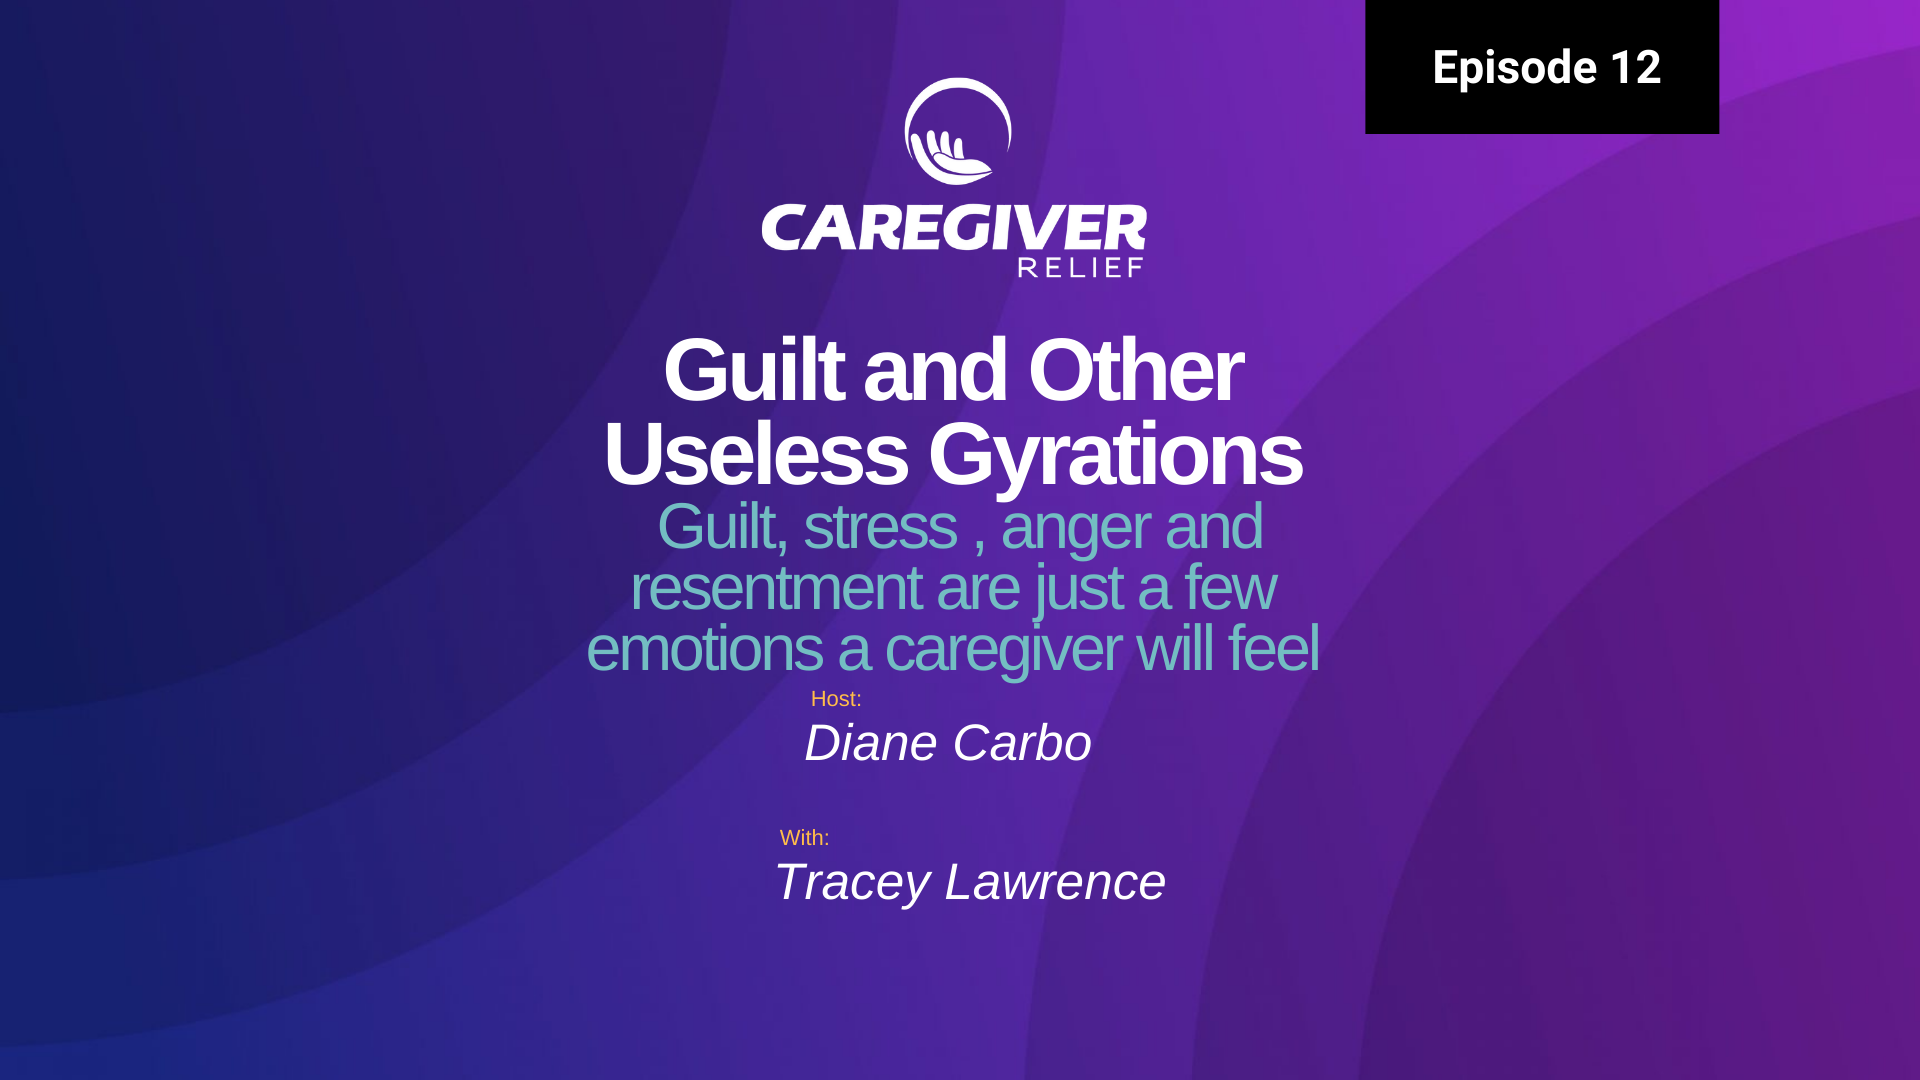 Episode 12 – Tracey Lawrence – Guilt and Other Useless Gyrations